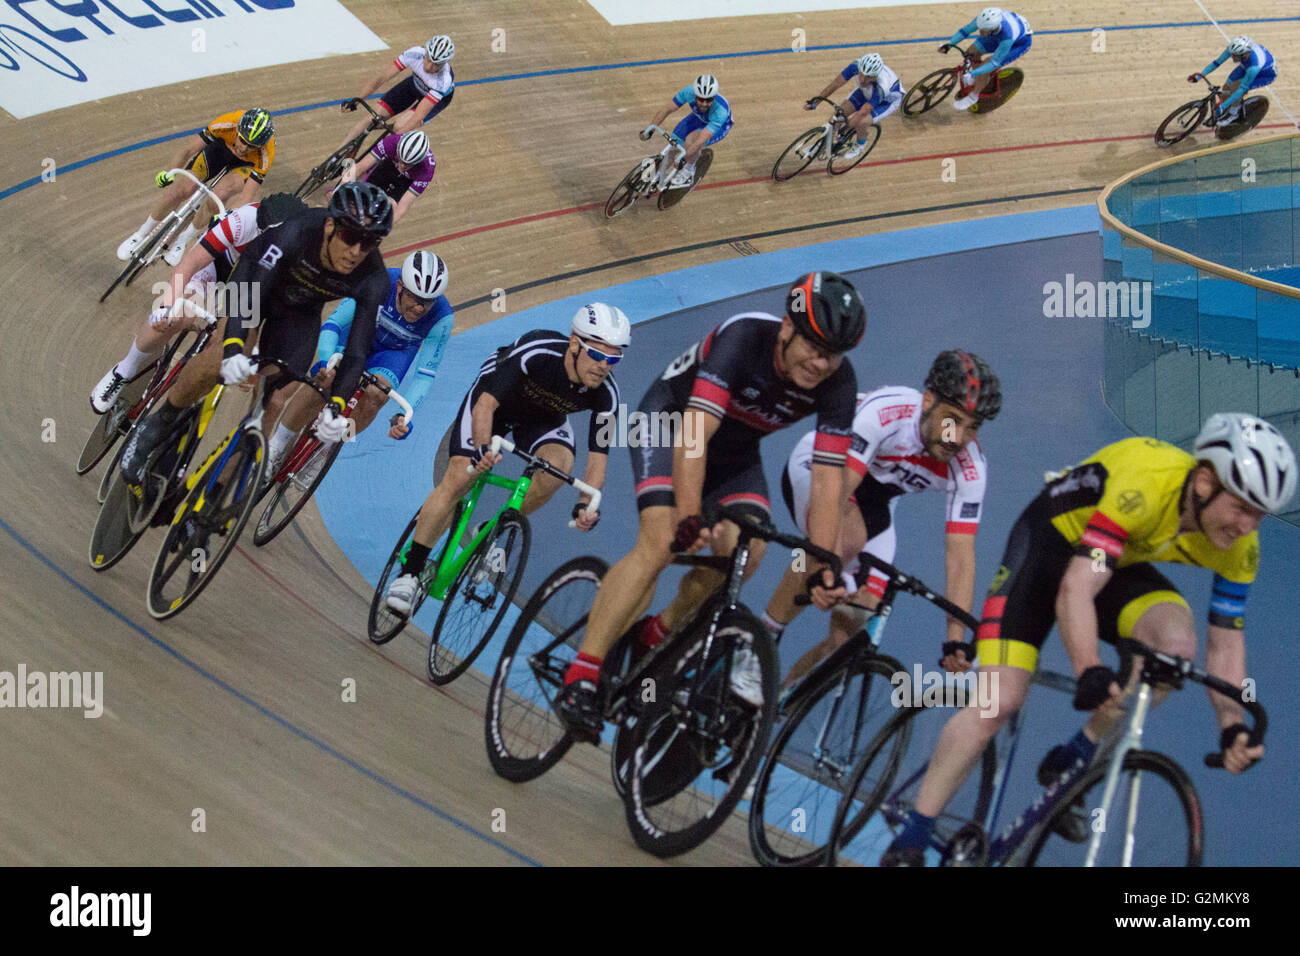 Interior of Lea Valley Lee Valley Olympic Velodrome, Stratford, London, with cycle race on wooden track Stock Photo